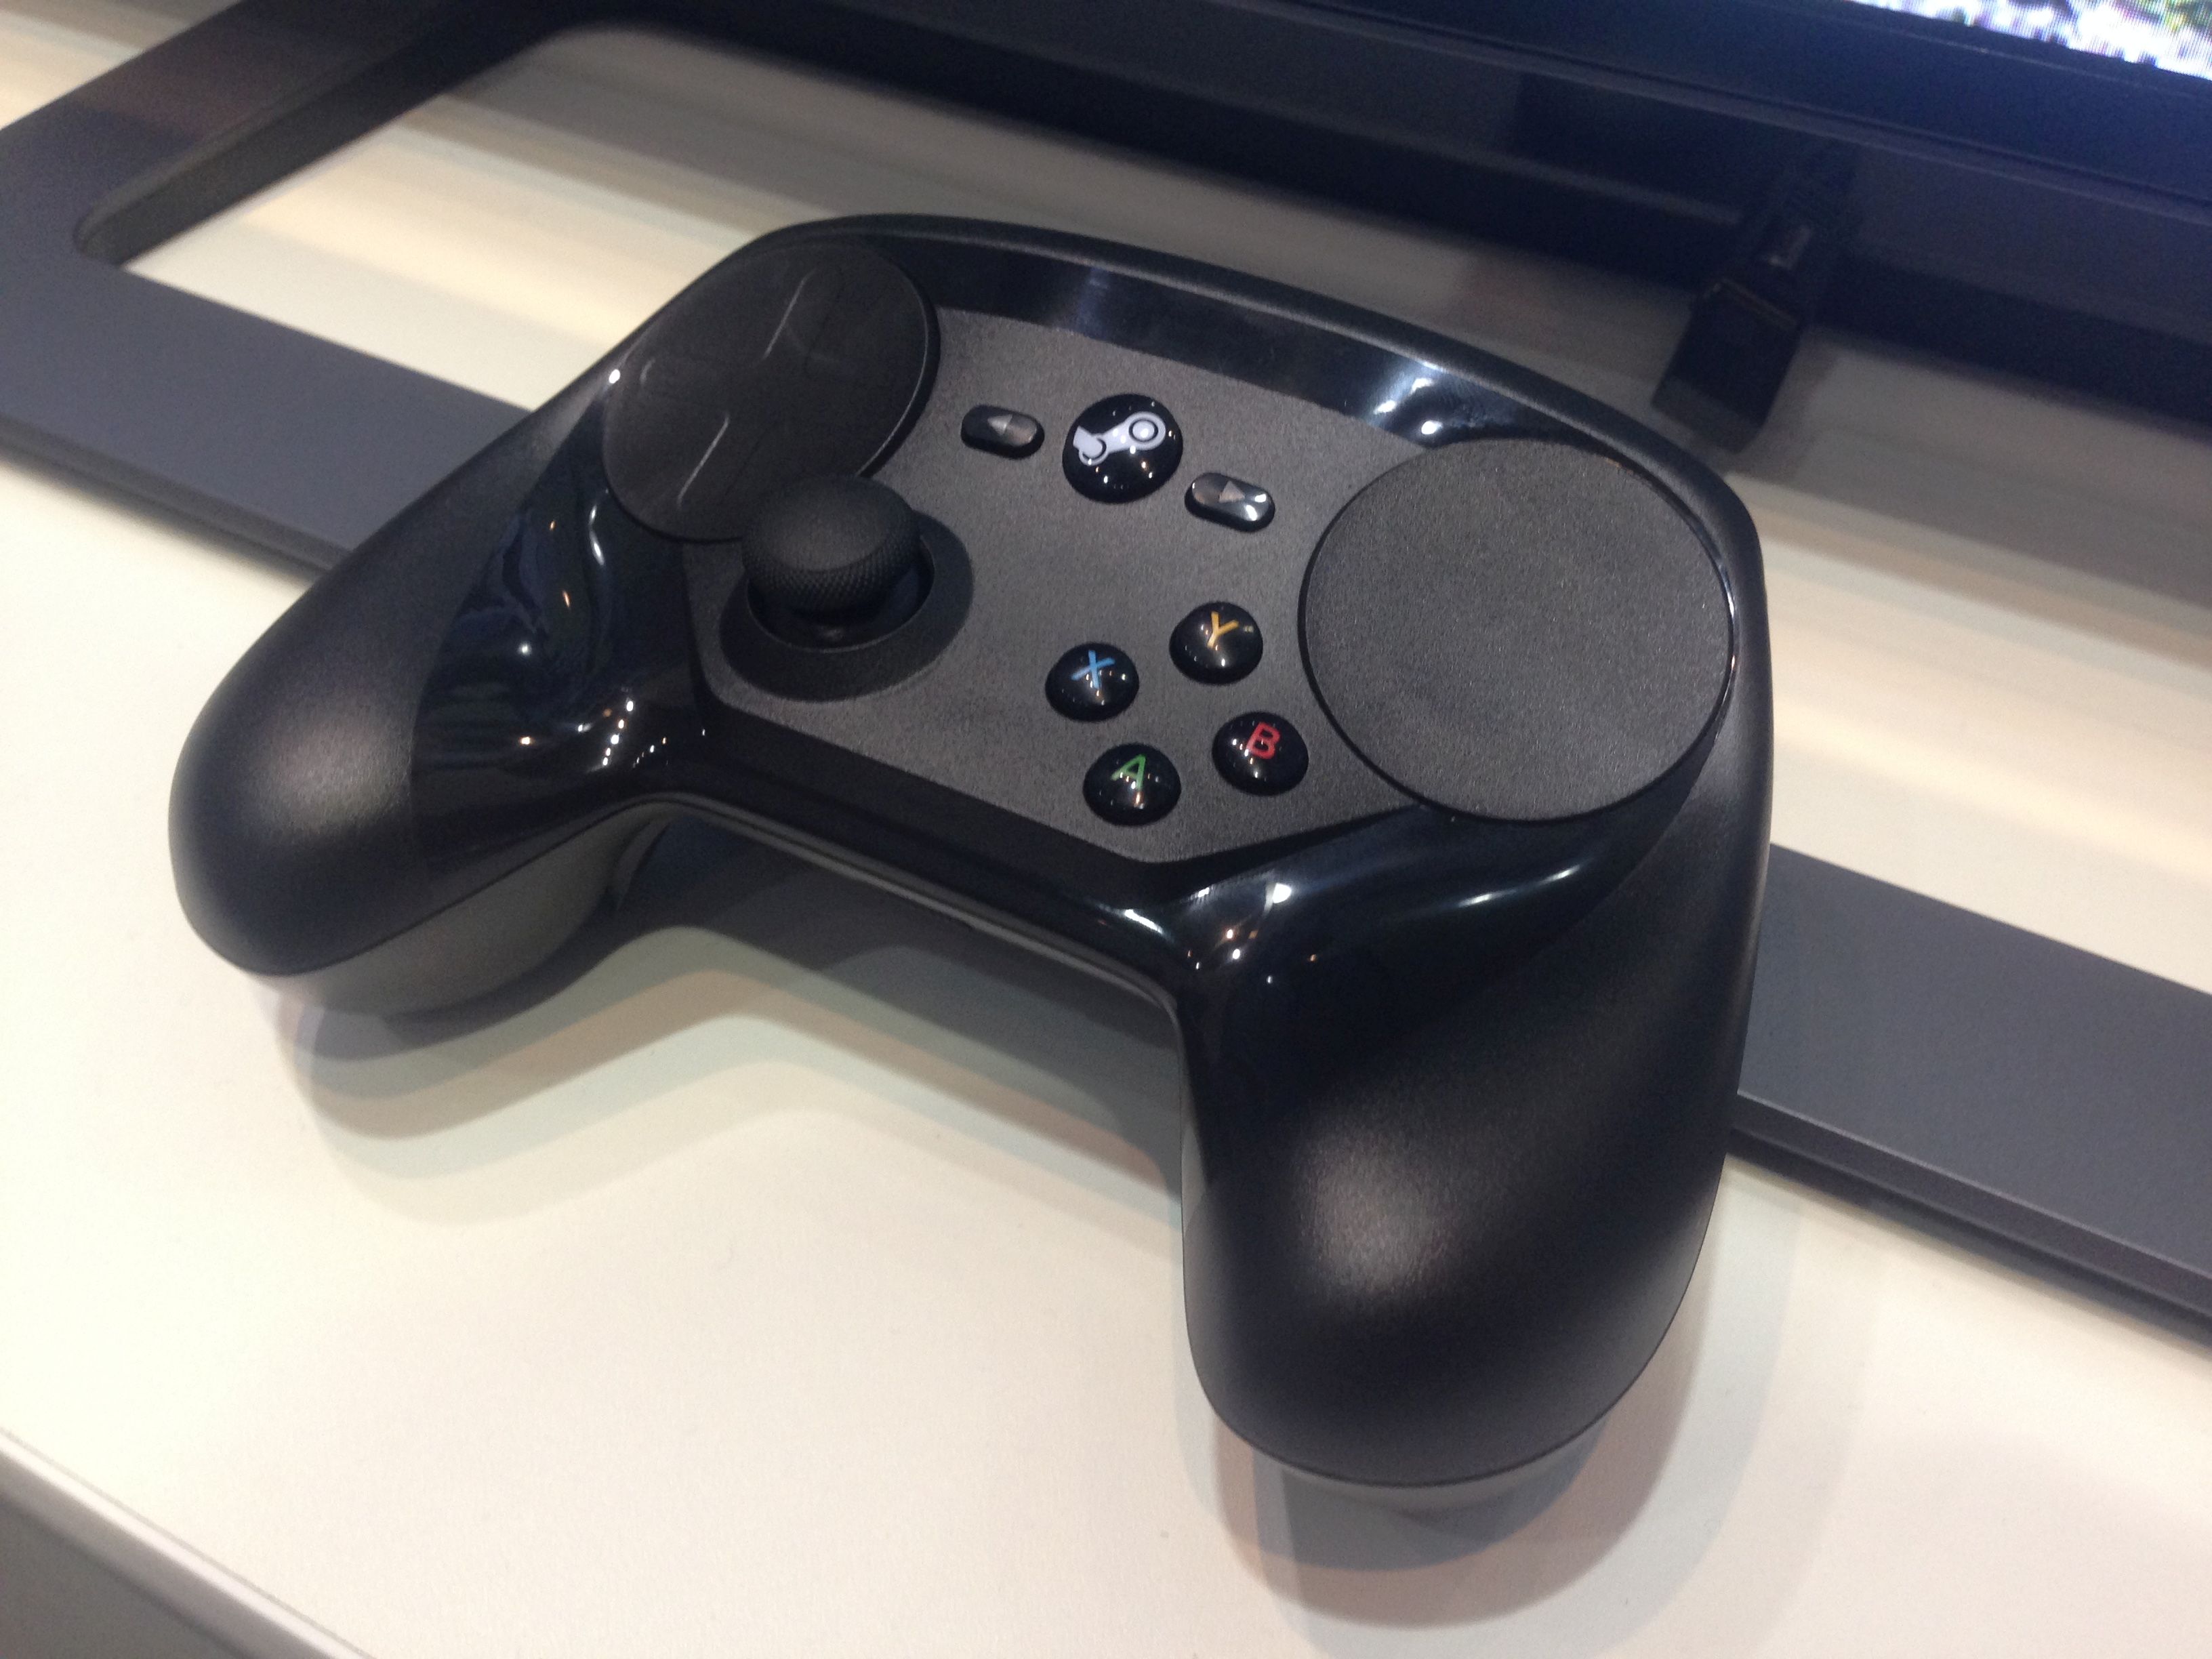 using a ps4 controller on steam games